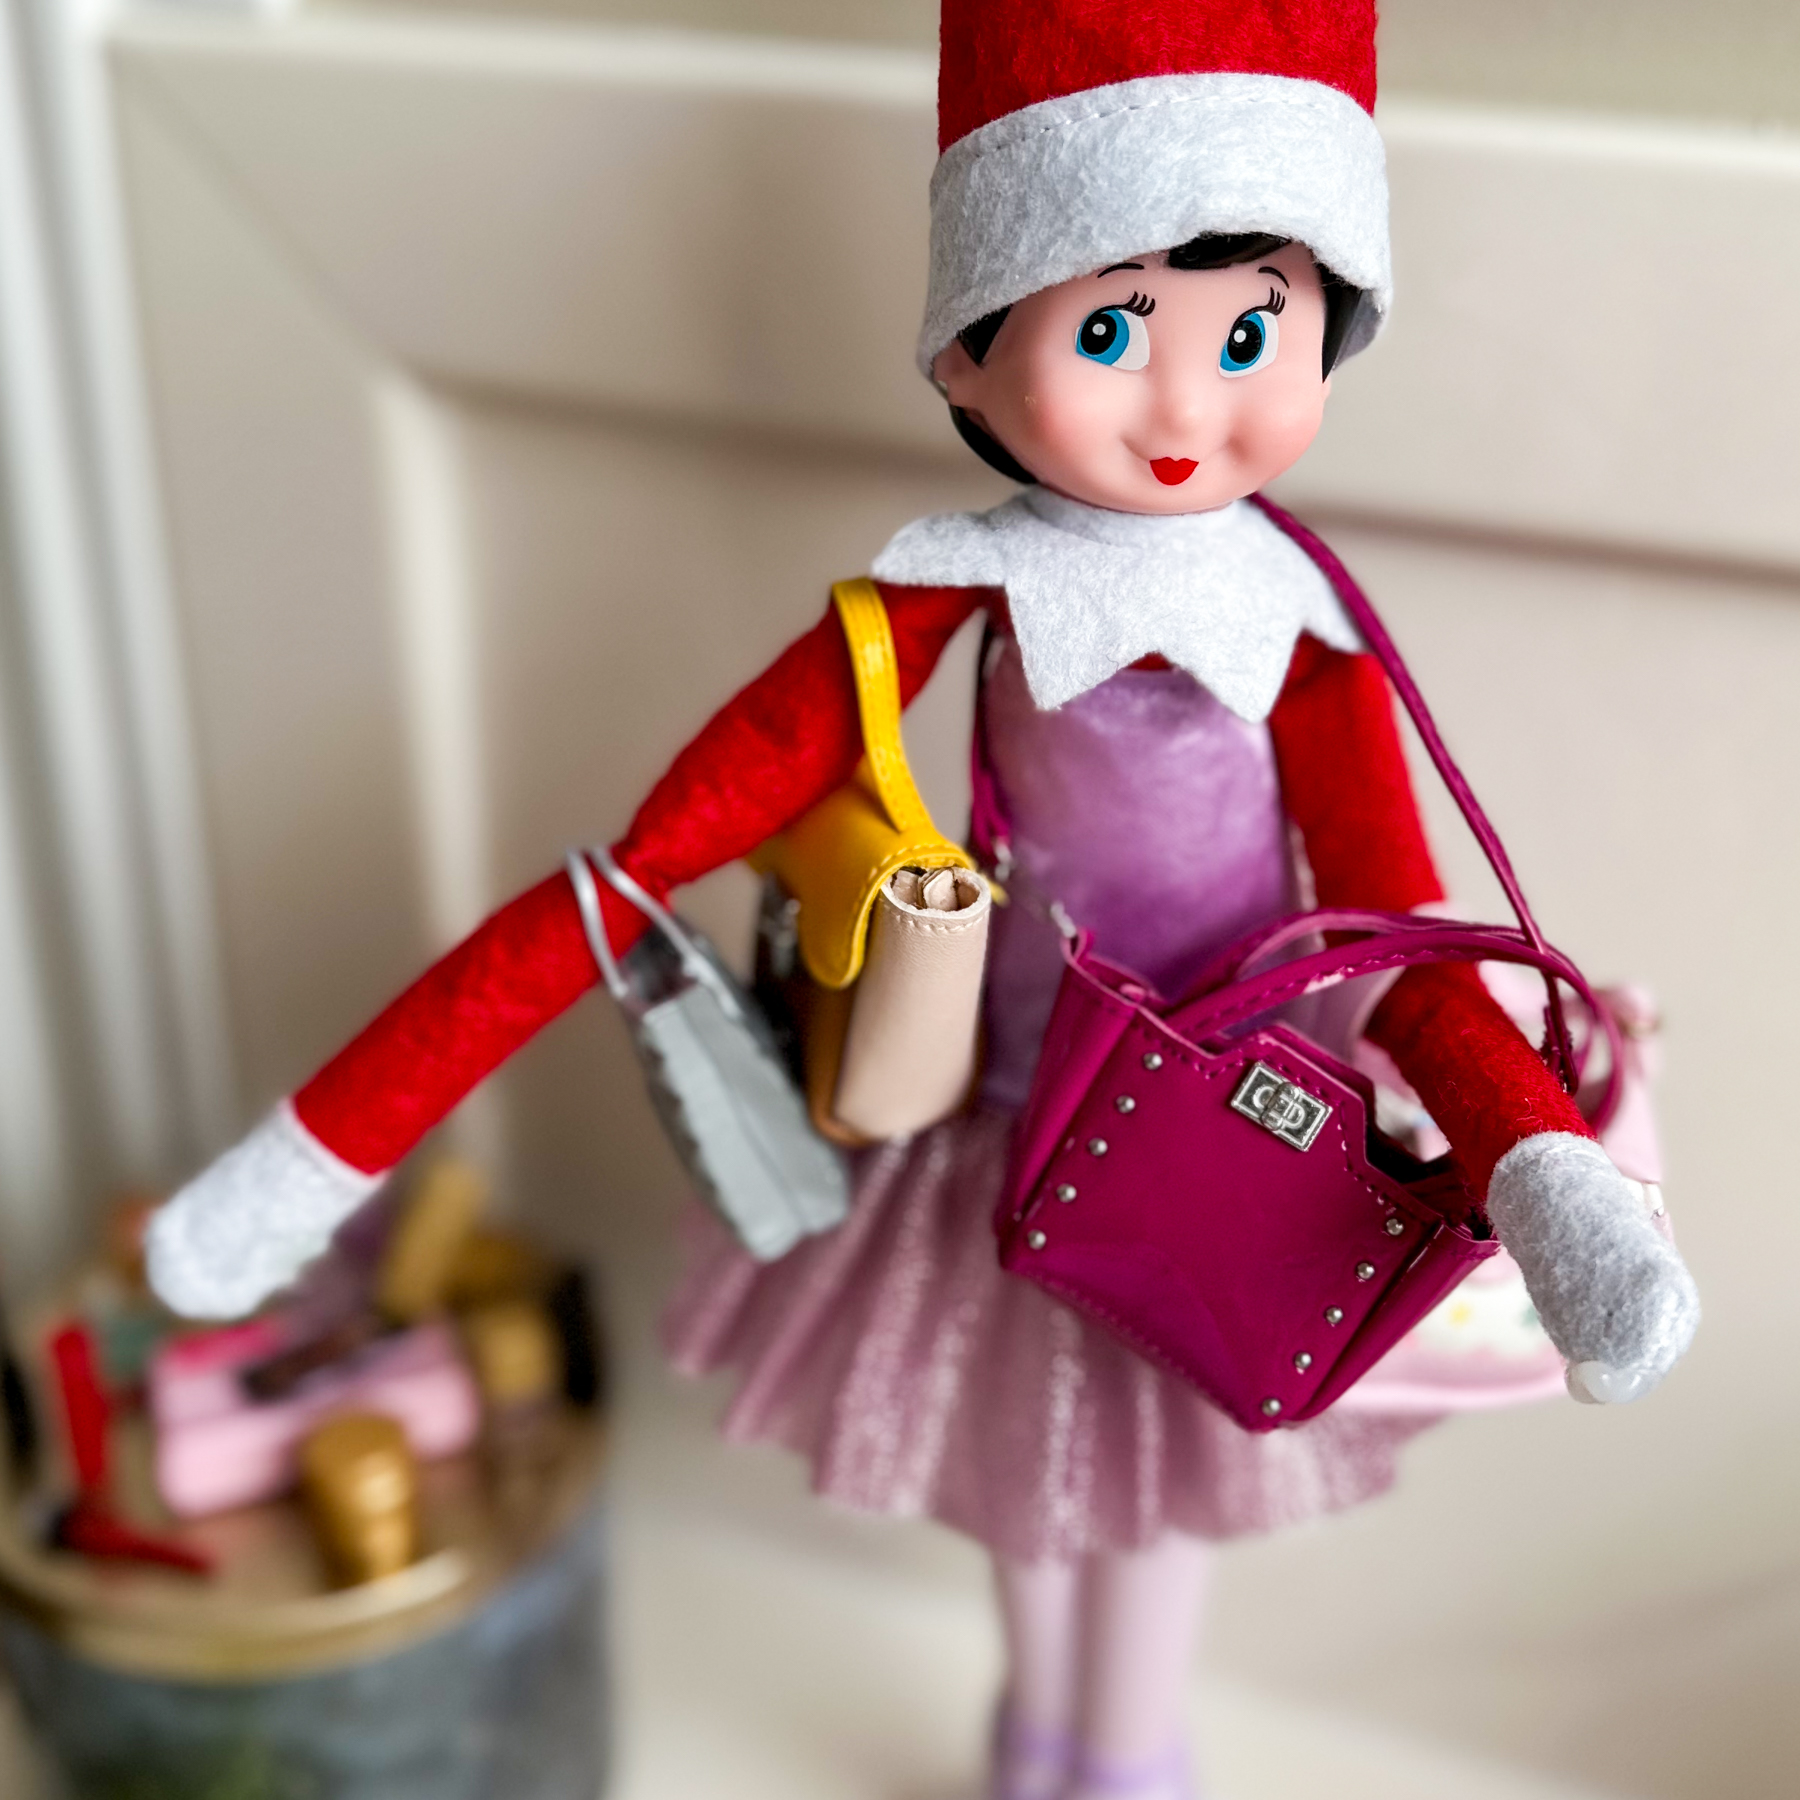 Elf on the Shelf: Girls’ Night Out